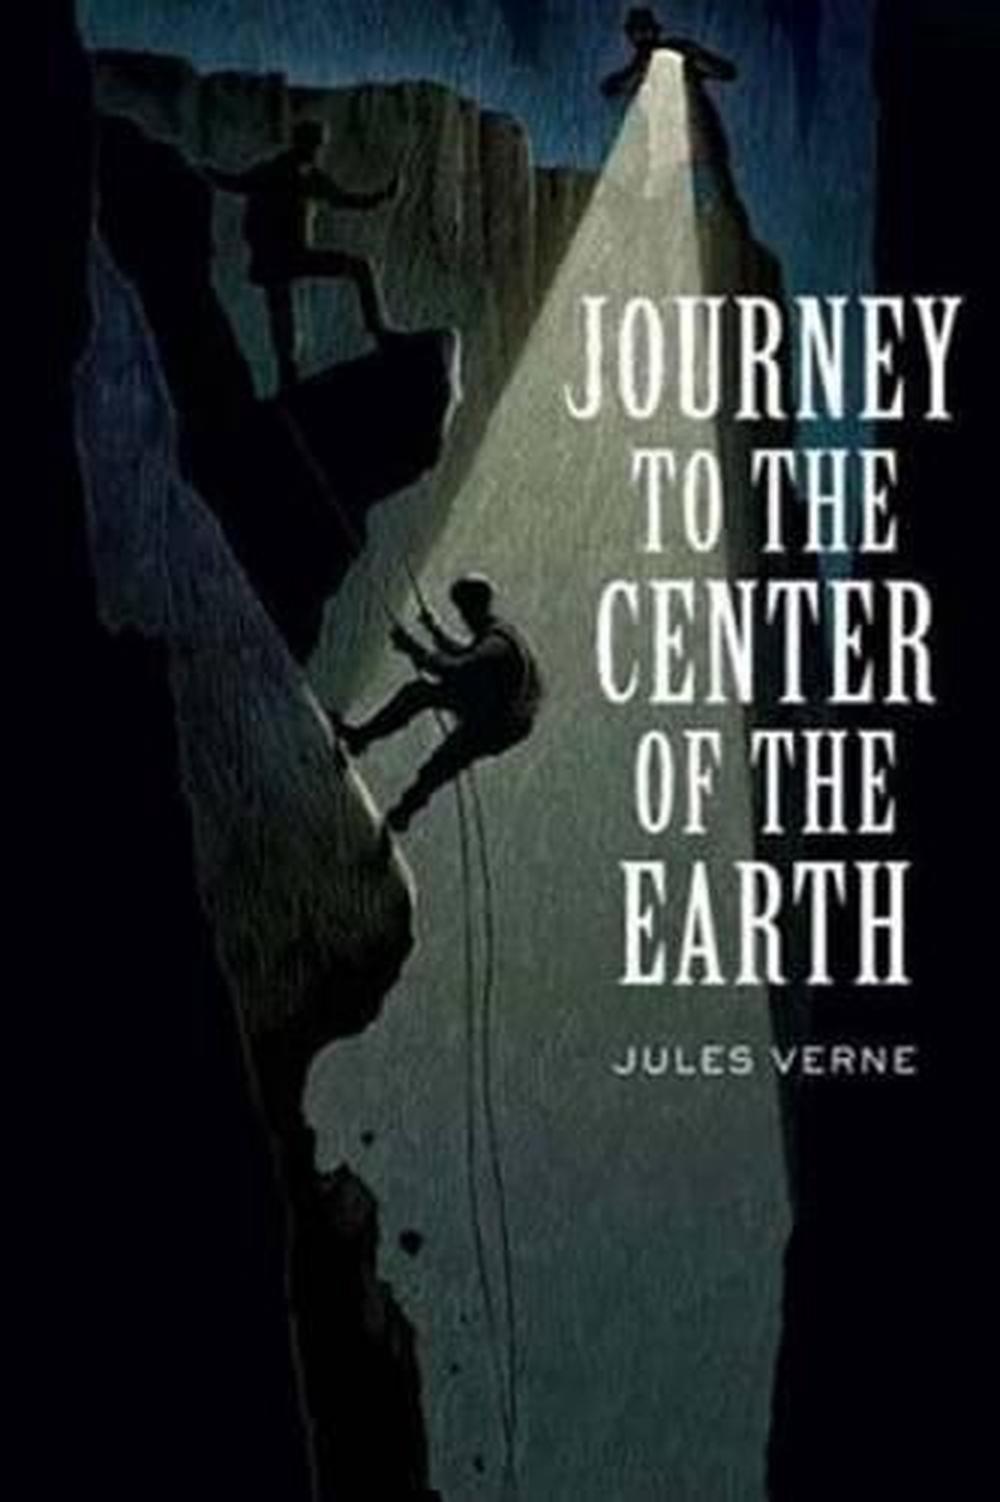 journey to the earth book